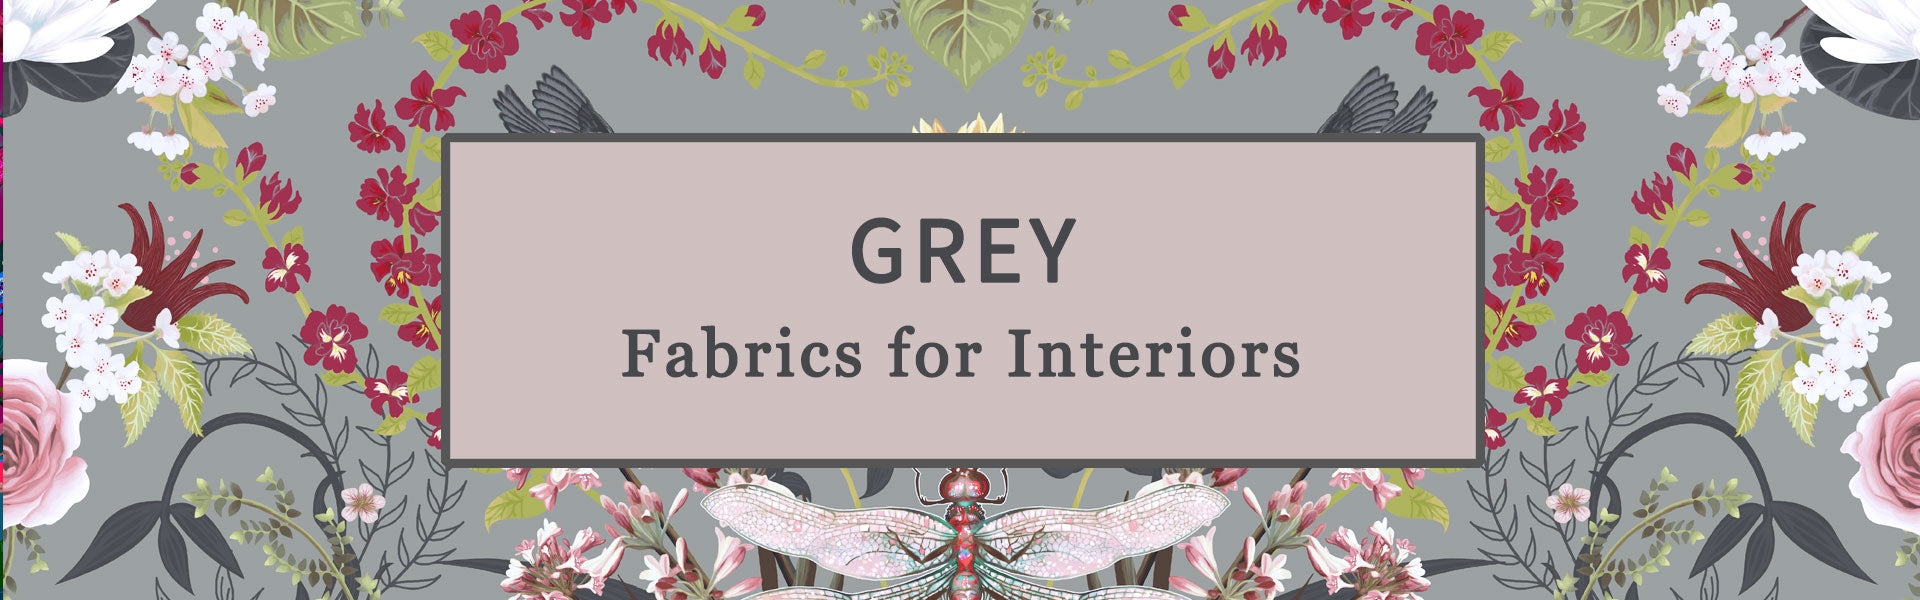 Grey Fabric for Interiors, Upholstery, Curtains & Soft Furnishings by Designer, Becca Who